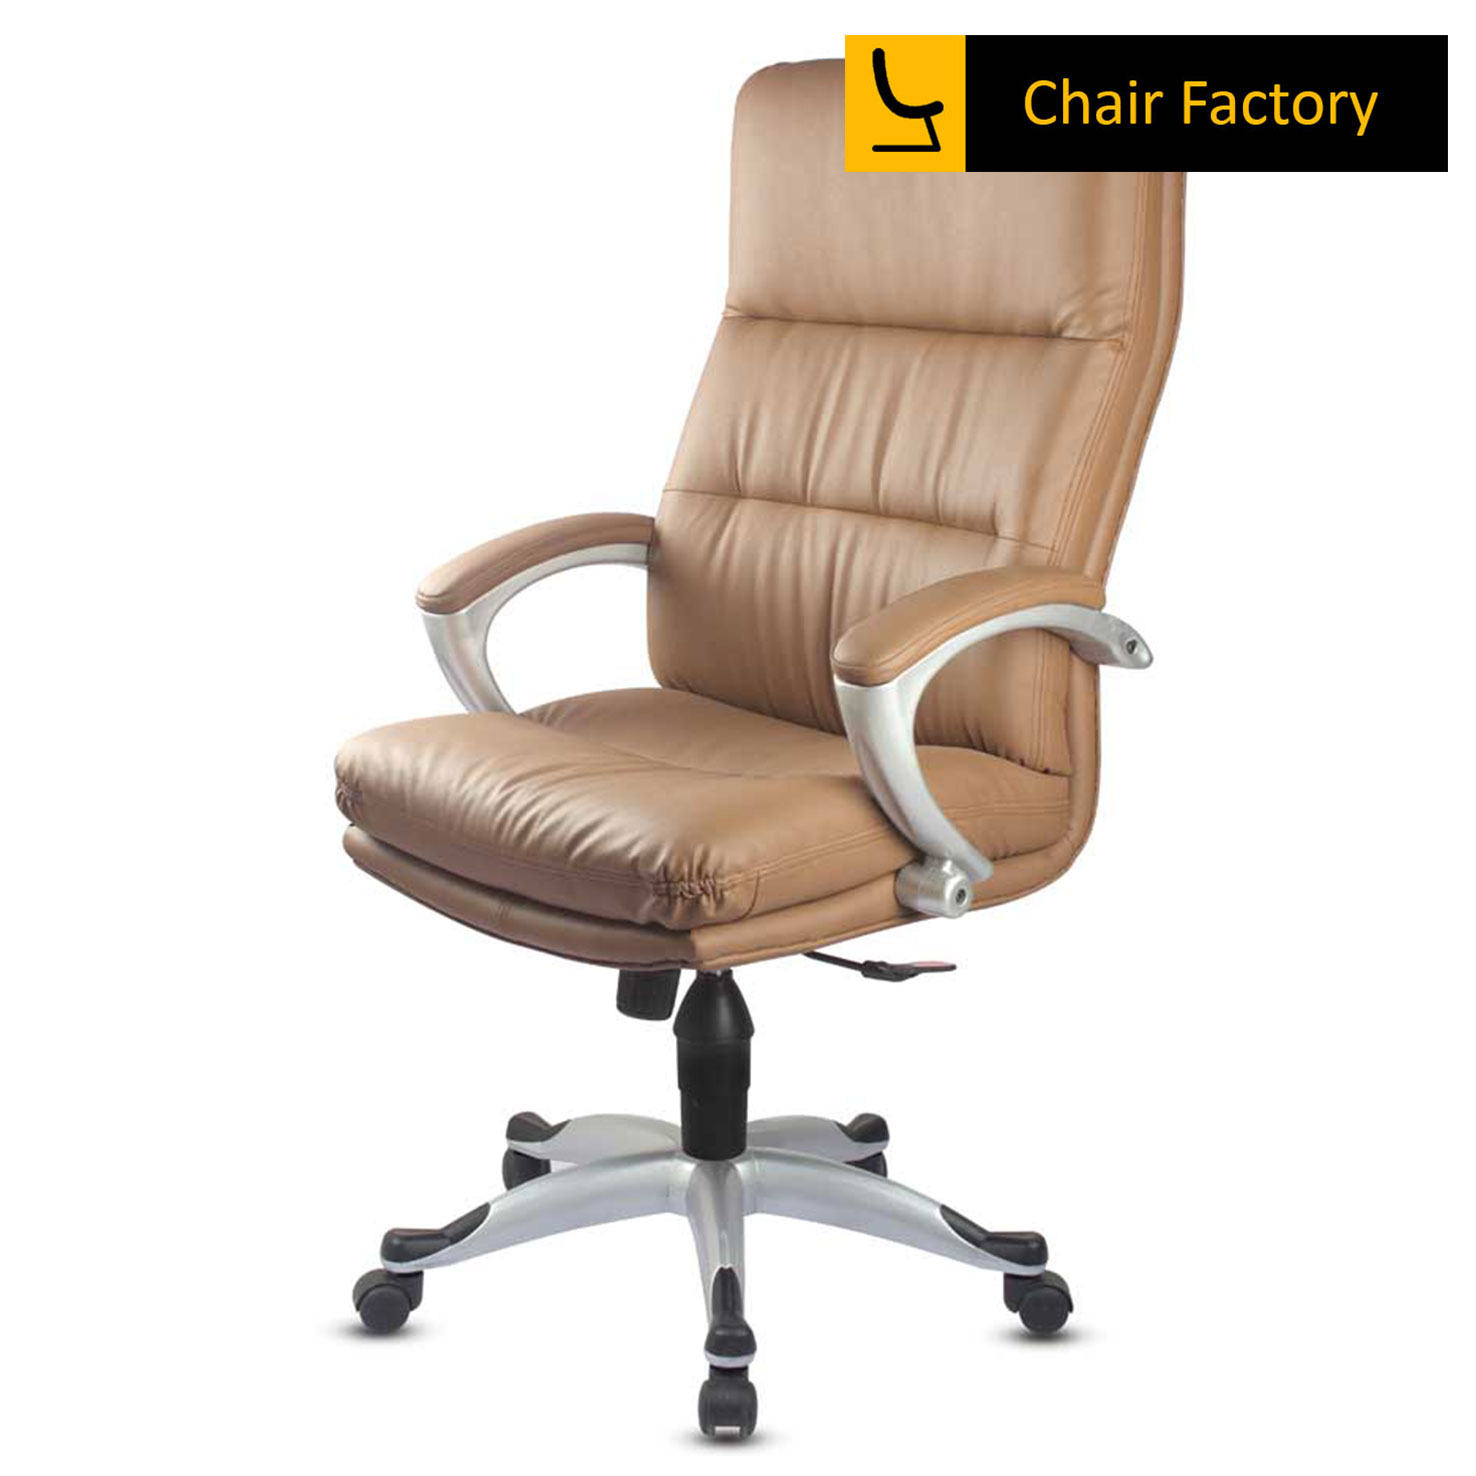 Bellefonte High Back Leather Chair